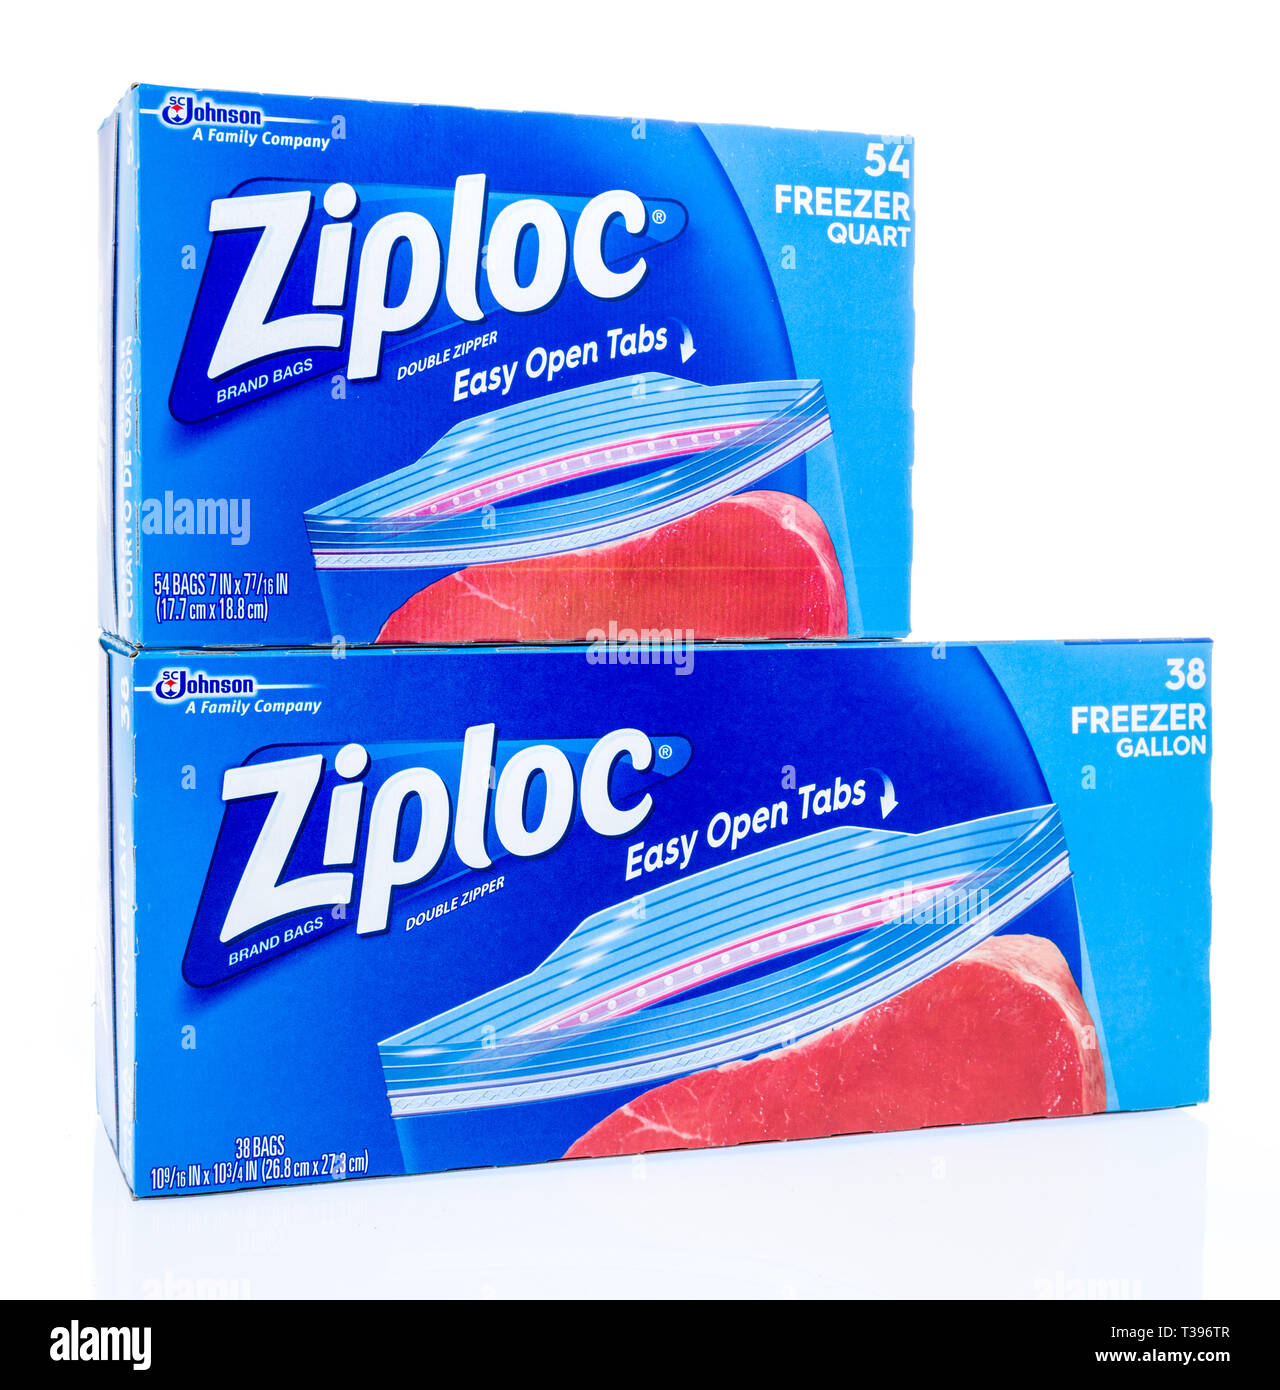 https://c8.alamy.com/comp/T396TR/winneconne-wi-7-april-2019-a-package-of-ziploc-brand-bags-double-zipper-with-easy-opne-tabs-in-freezer-quart-and-gallon-size-on-an-isolated-backg-T396TR.jpg